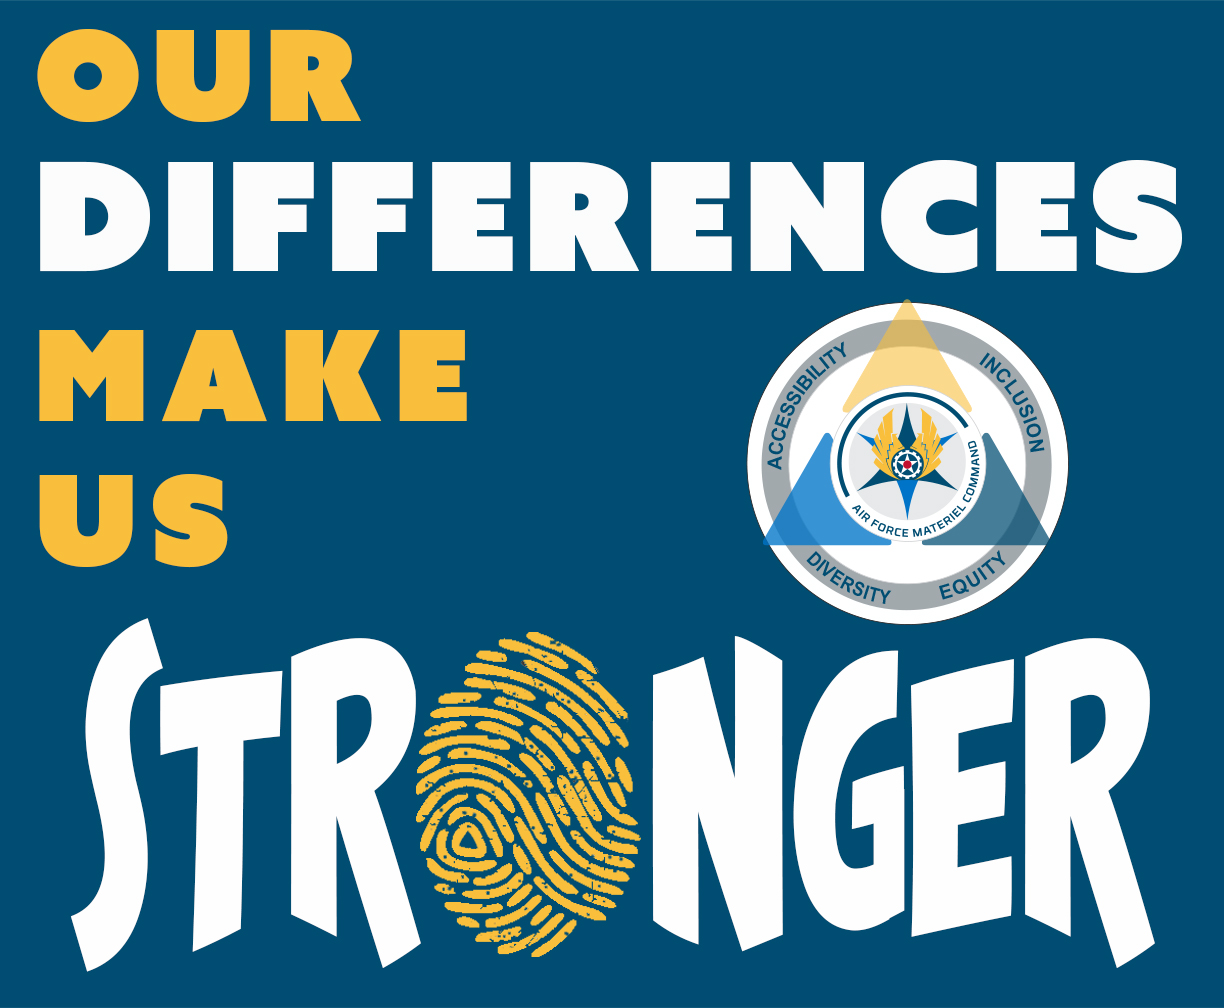 Image says Our Difference Make Us Stronger